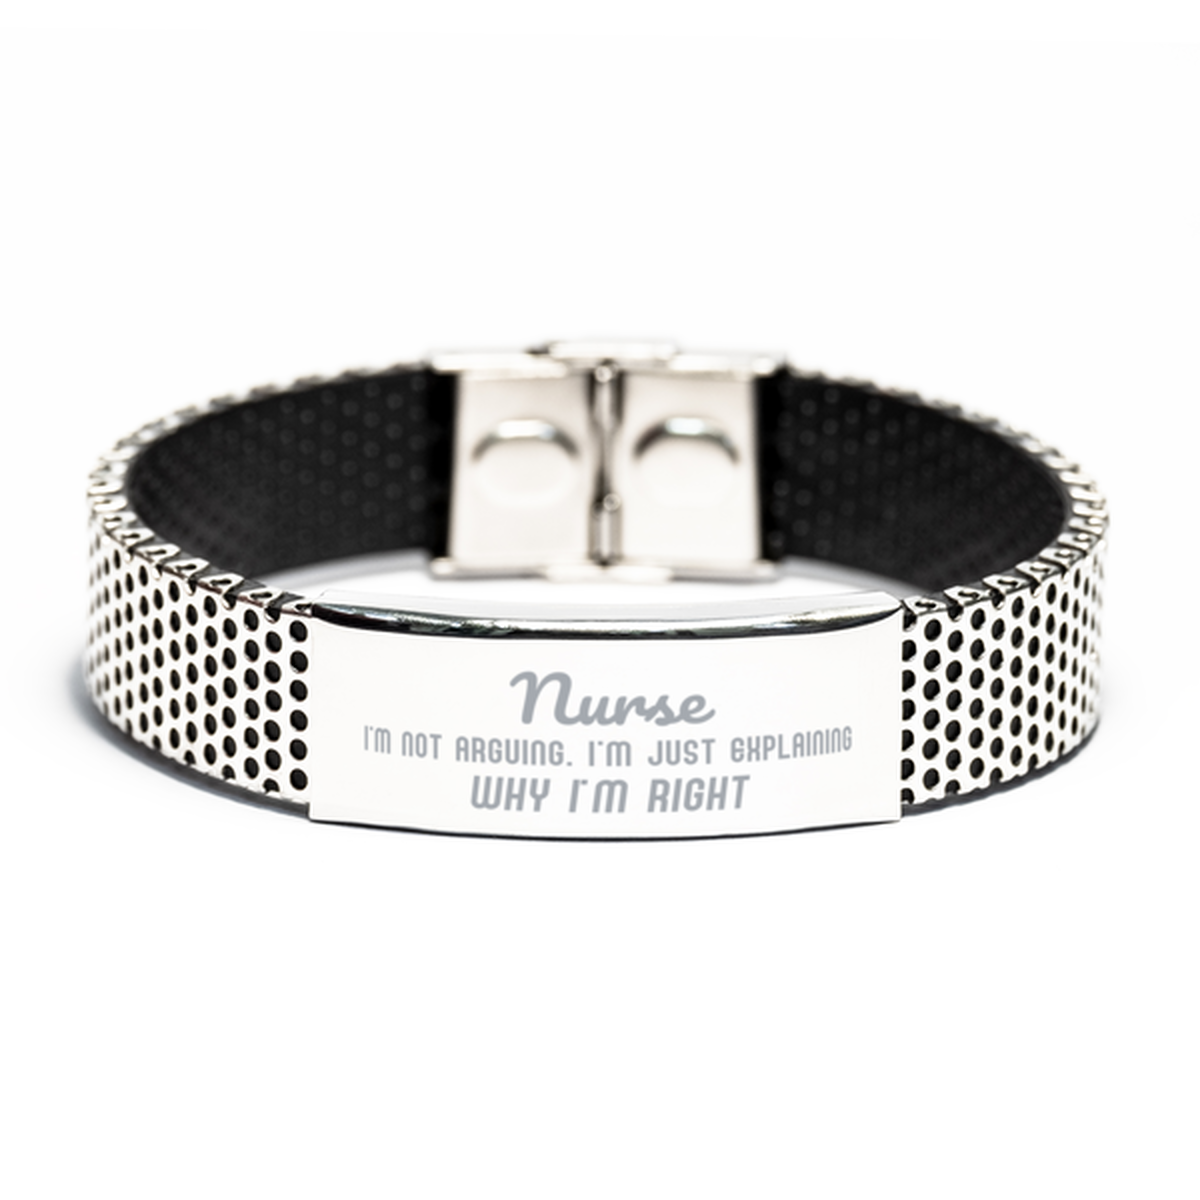 Nurse I'm not Arguing. I'm Just Explaining Why I'm RIGHT Stainless Steel Bracelet, Funny Saying Quote Nurse Gifts For Nurse Graduation Birthday Christmas Gifts for Men Women Coworker